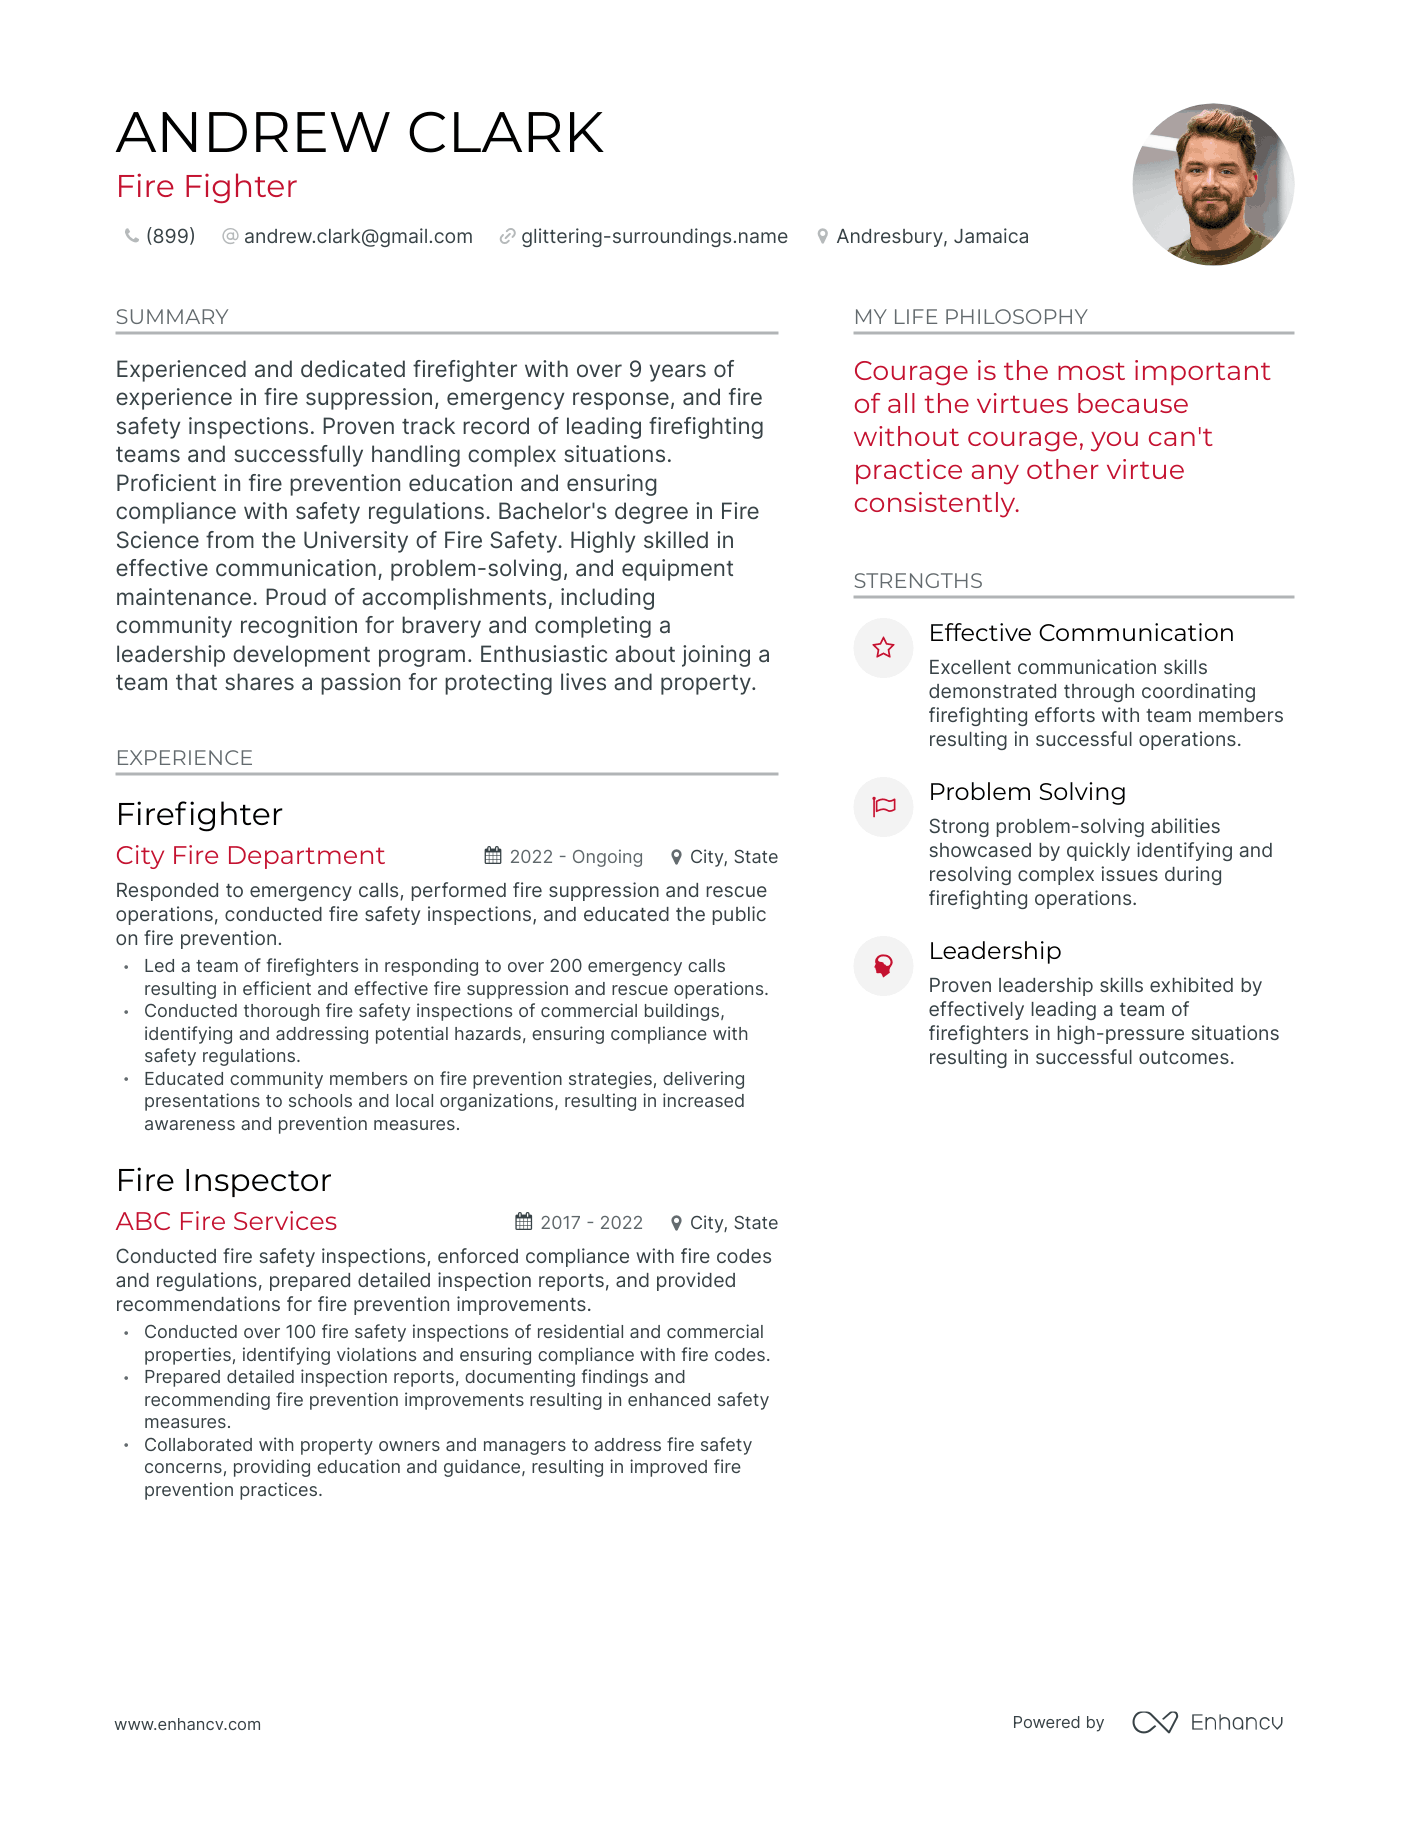 Fire Fighter resume example